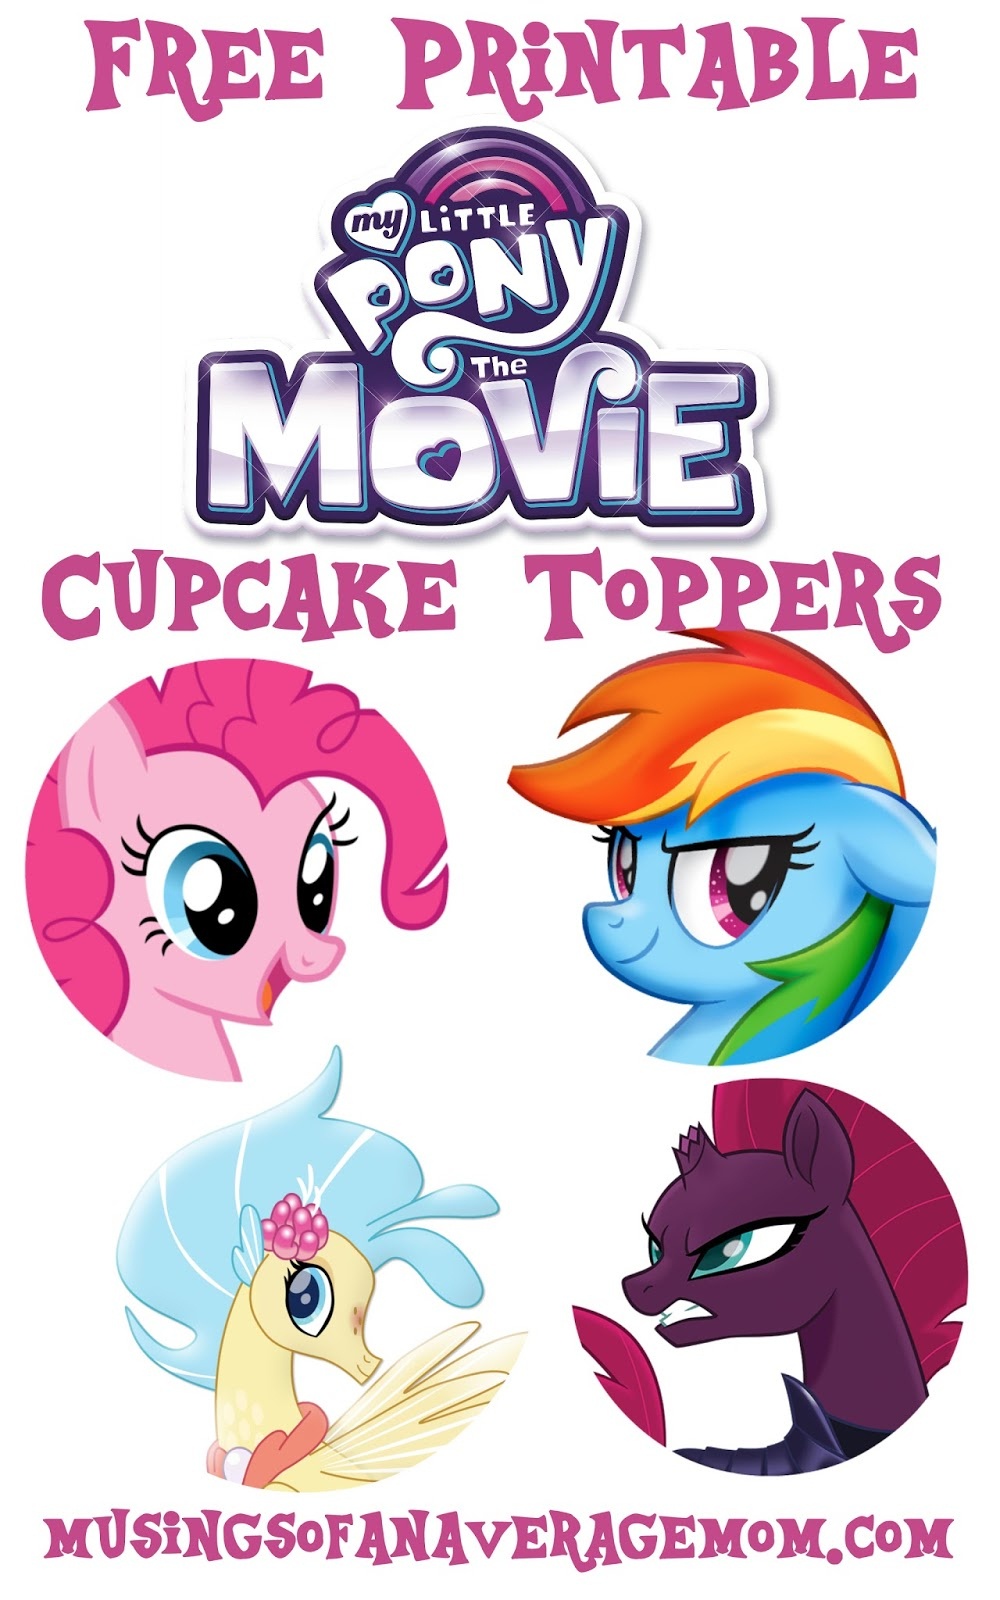 Musings Of An Average Mom: My Little Pony Movie - Cupcake Toppers - Free Printable My Little Pony Cupcake Toppers